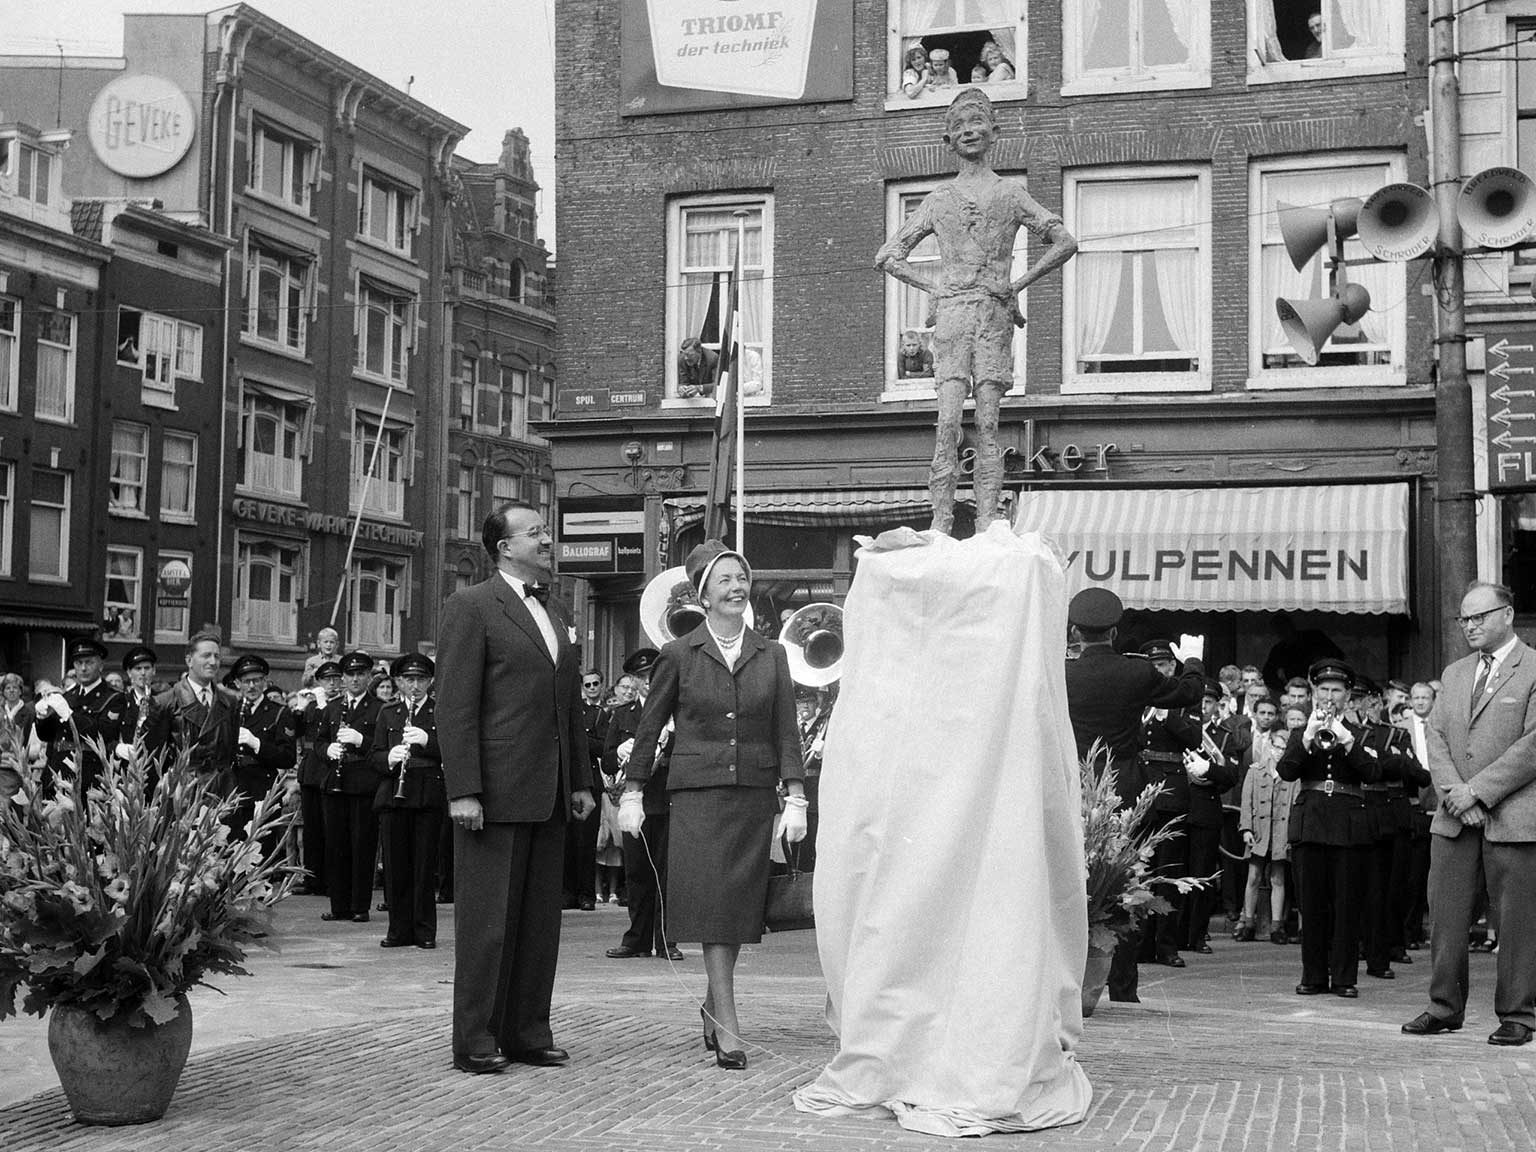 Unveiling of Het Lieverdje at Spui square, Amsterdam, in 1960